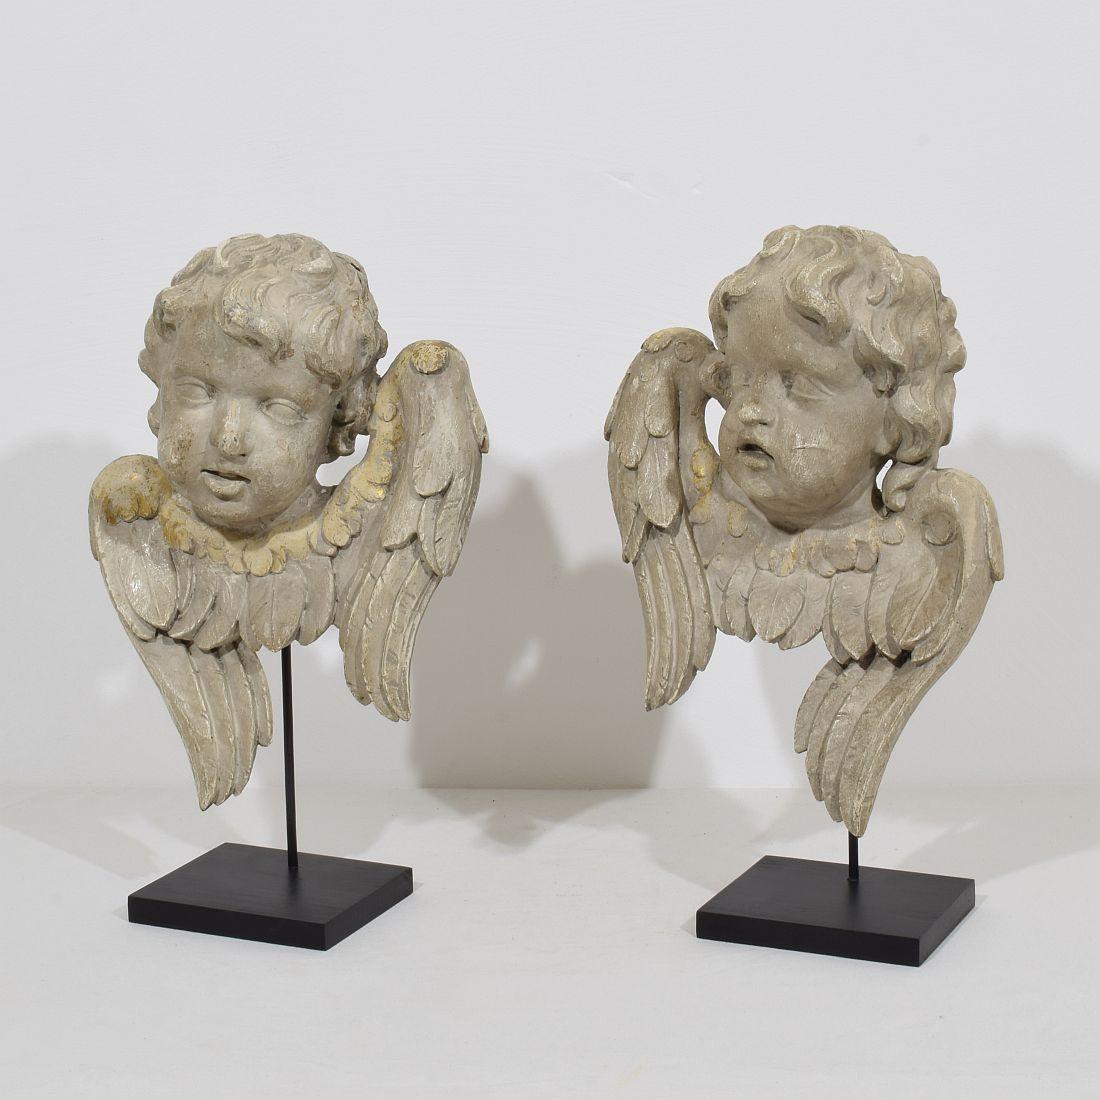 Beautiful and unique hand carved wooden pair of winged angel head ornaments.
Italy, circa 1650-1750.
Weathered and small losses.
Measurement individual and includes the wooden base.
More detailed photo's available on request